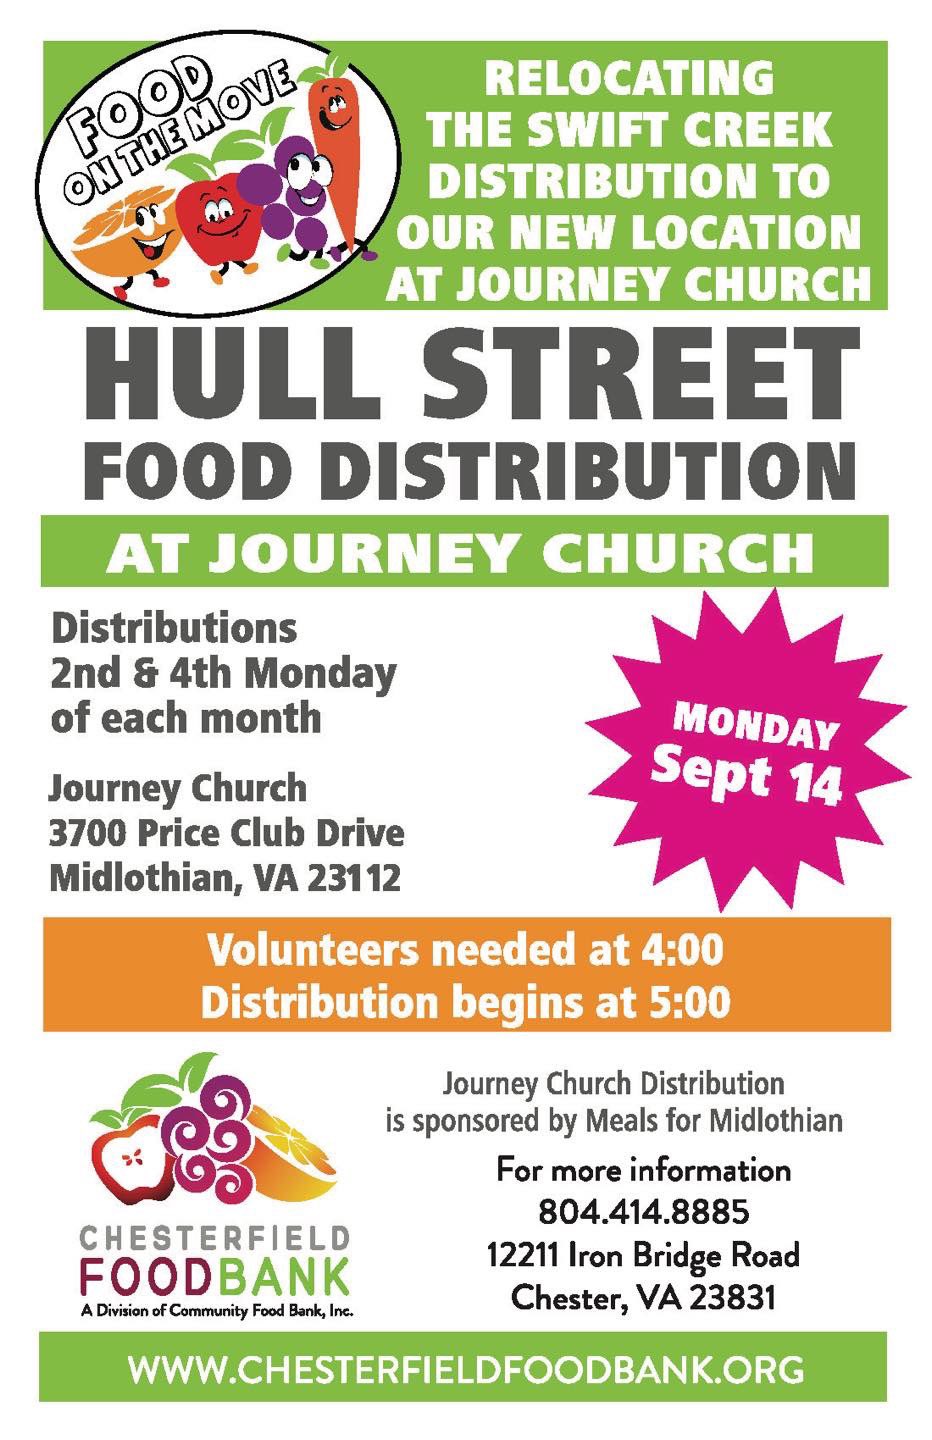 chesterfield food bank hours